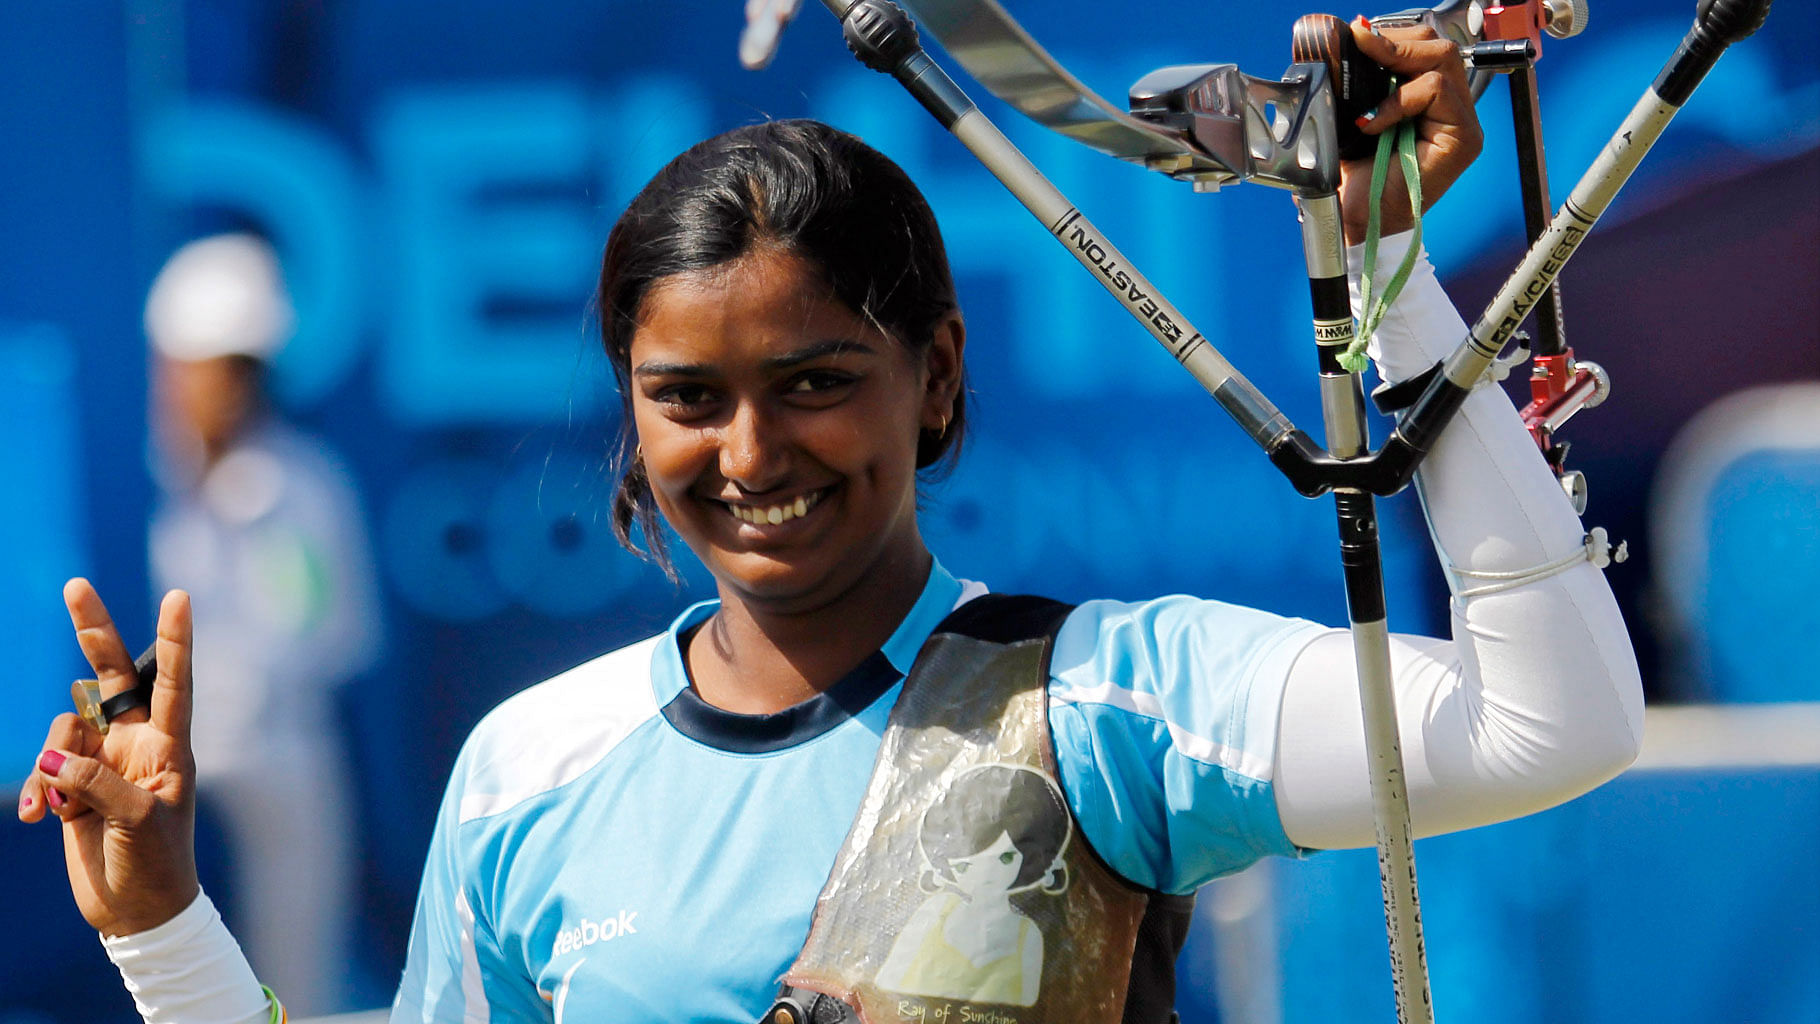 Indian archer Deepika Kumari will be competing at her third Olympic Games this summer in Tokyo.